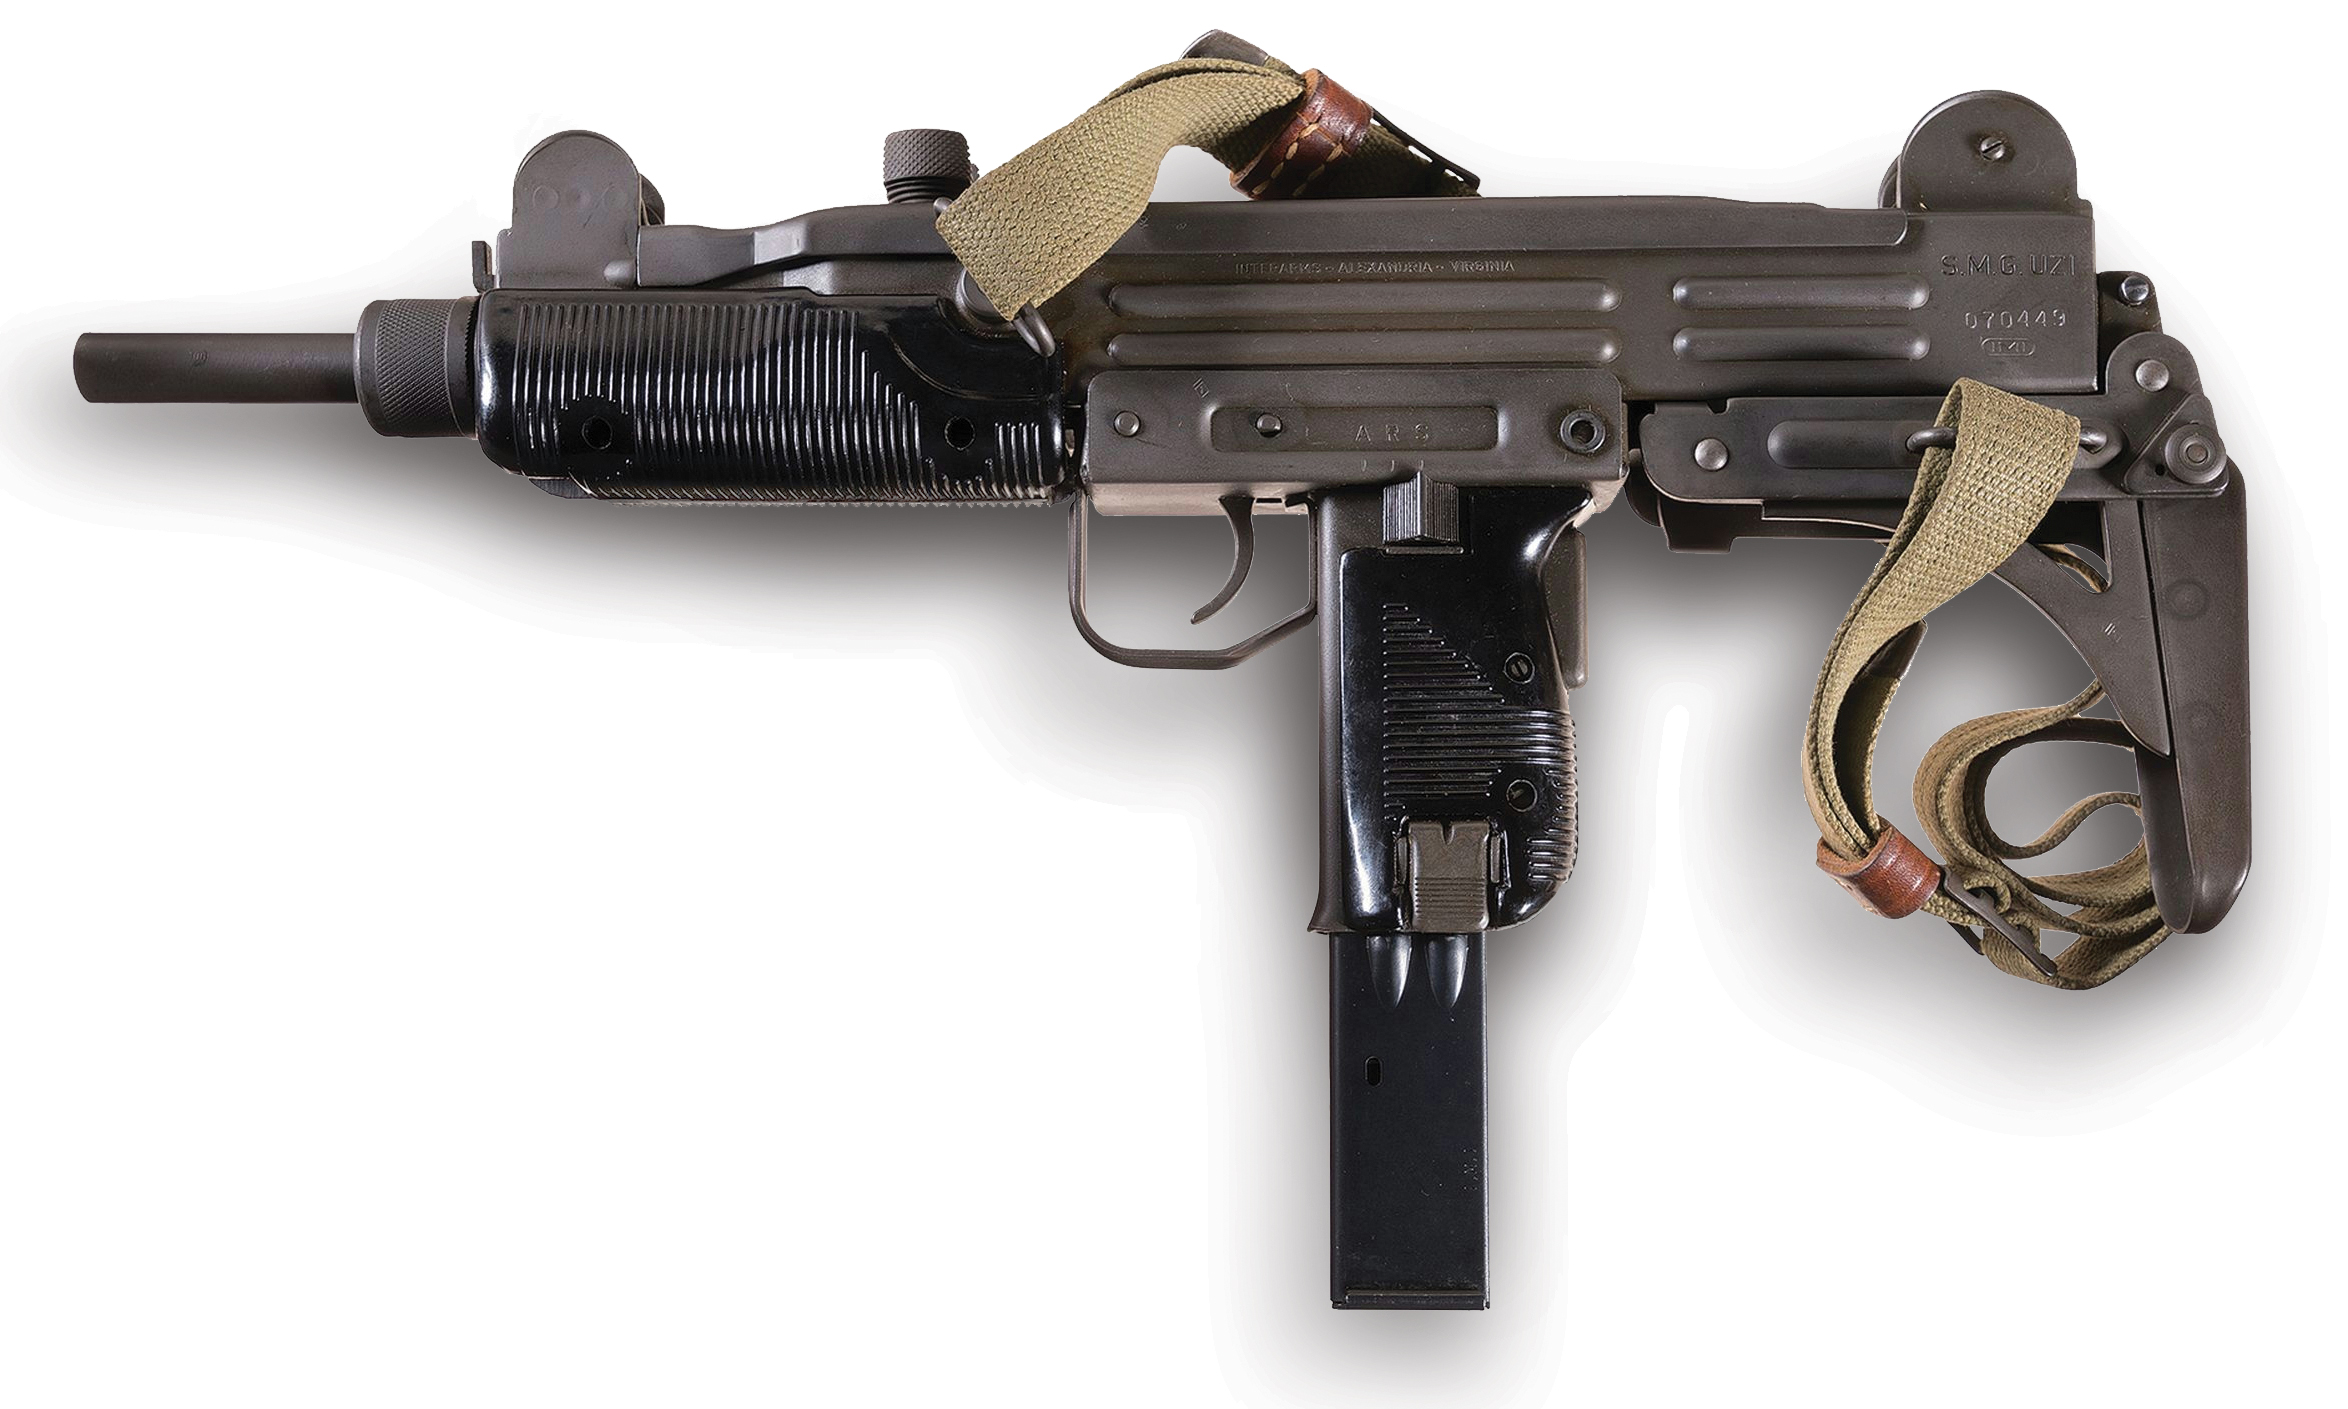 Why is the Uzi Submachine Gun So Beloved By Special Forces?